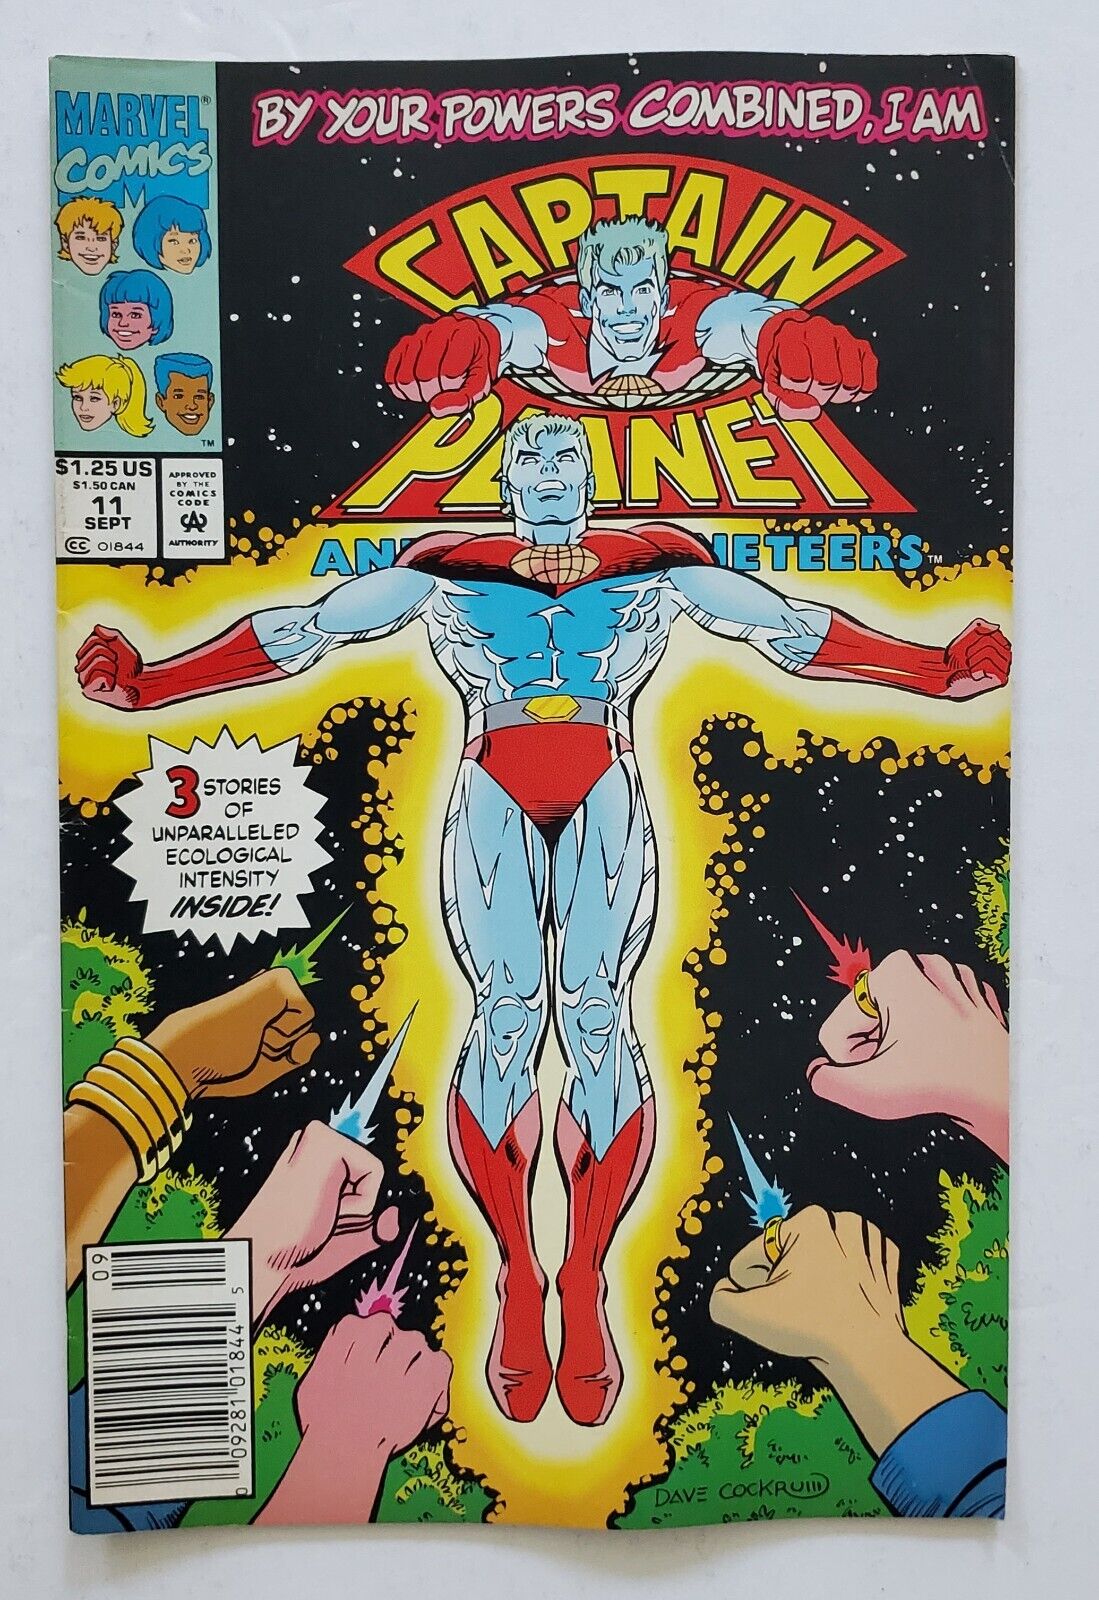 Captain Planet and the Planeteers #11 - RARE, low print run Newsstand. 